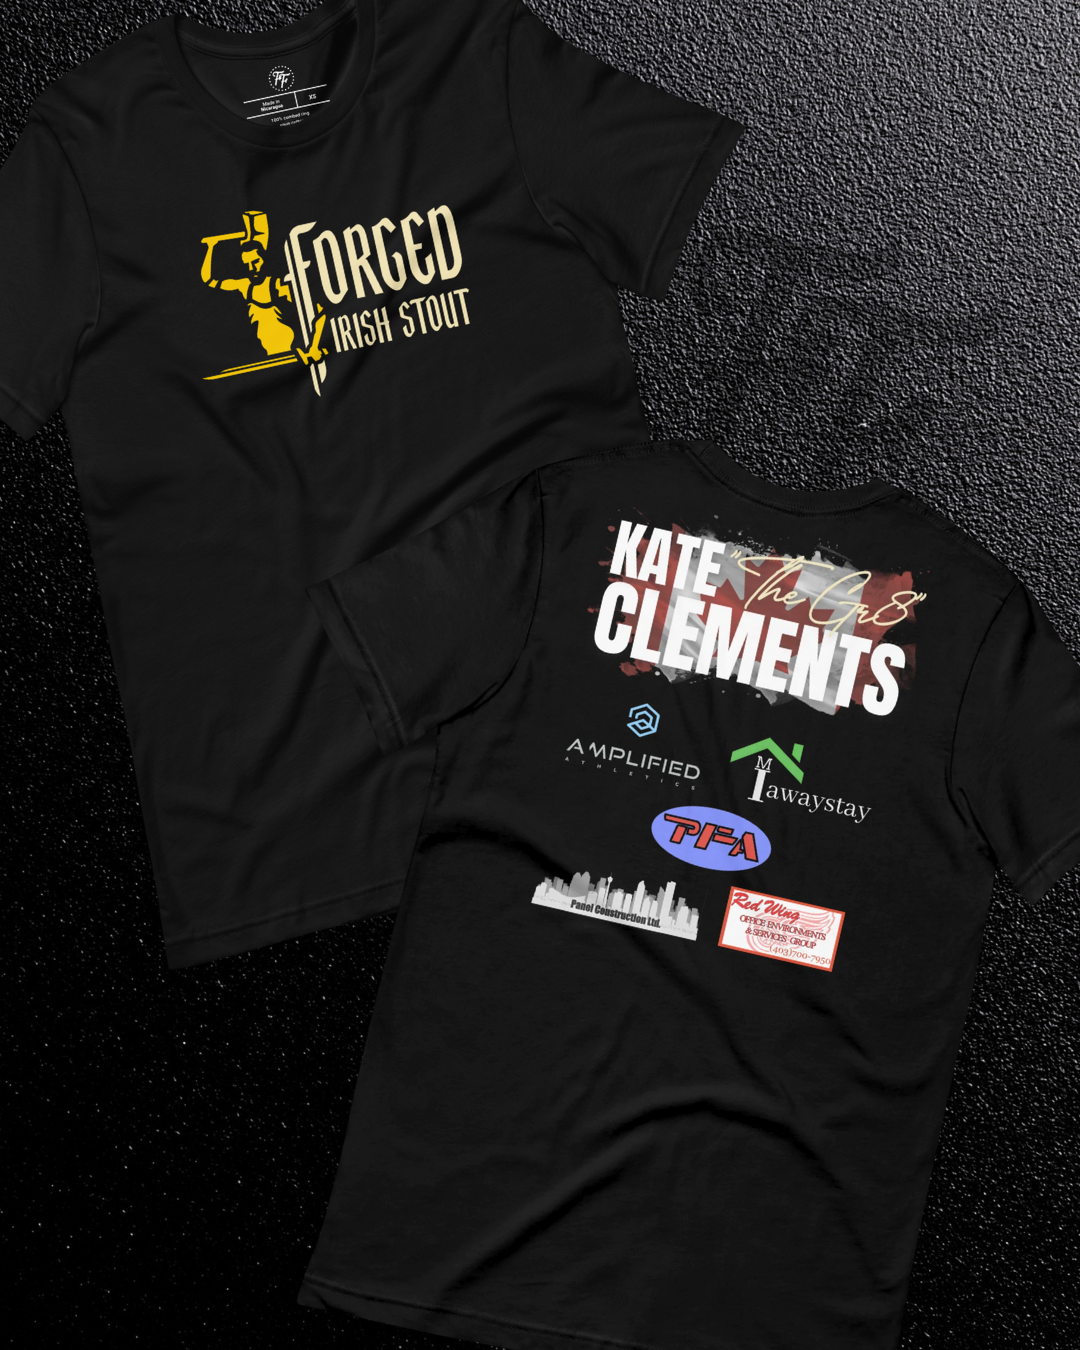 Kate Clements - June 17th Muay Thai Championship Walkout Shirt [Limited Edition]